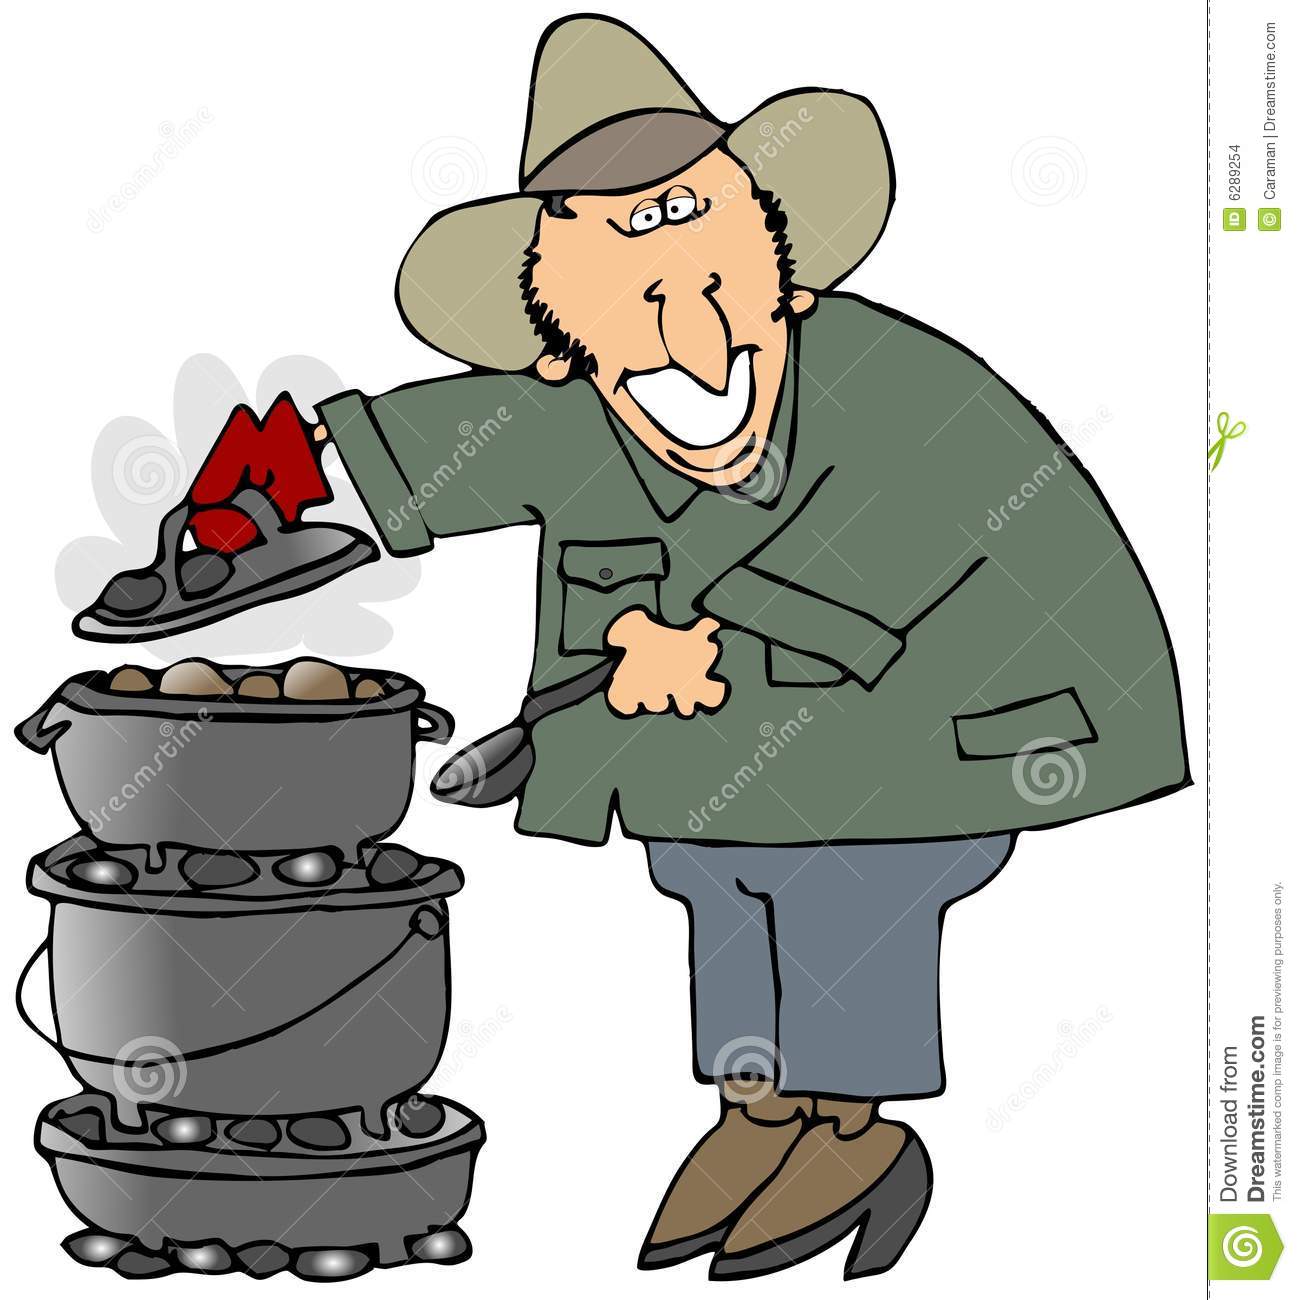 This Illustration Depicts A Man Cooking On Three Stacked Dutch Ovens